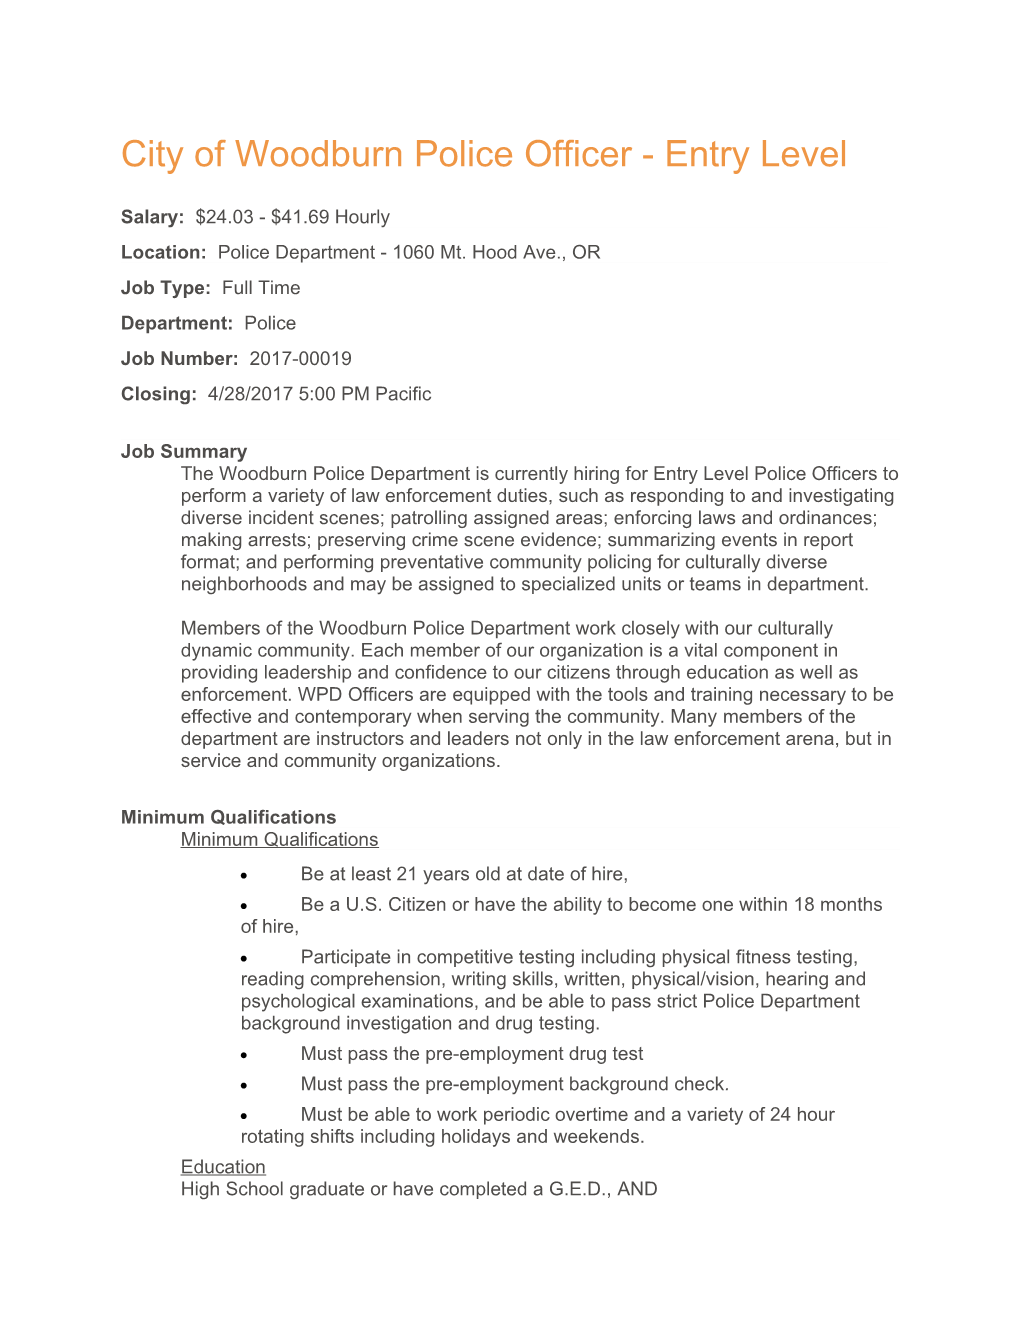 City of Woodburn Police Officer - Entry Level